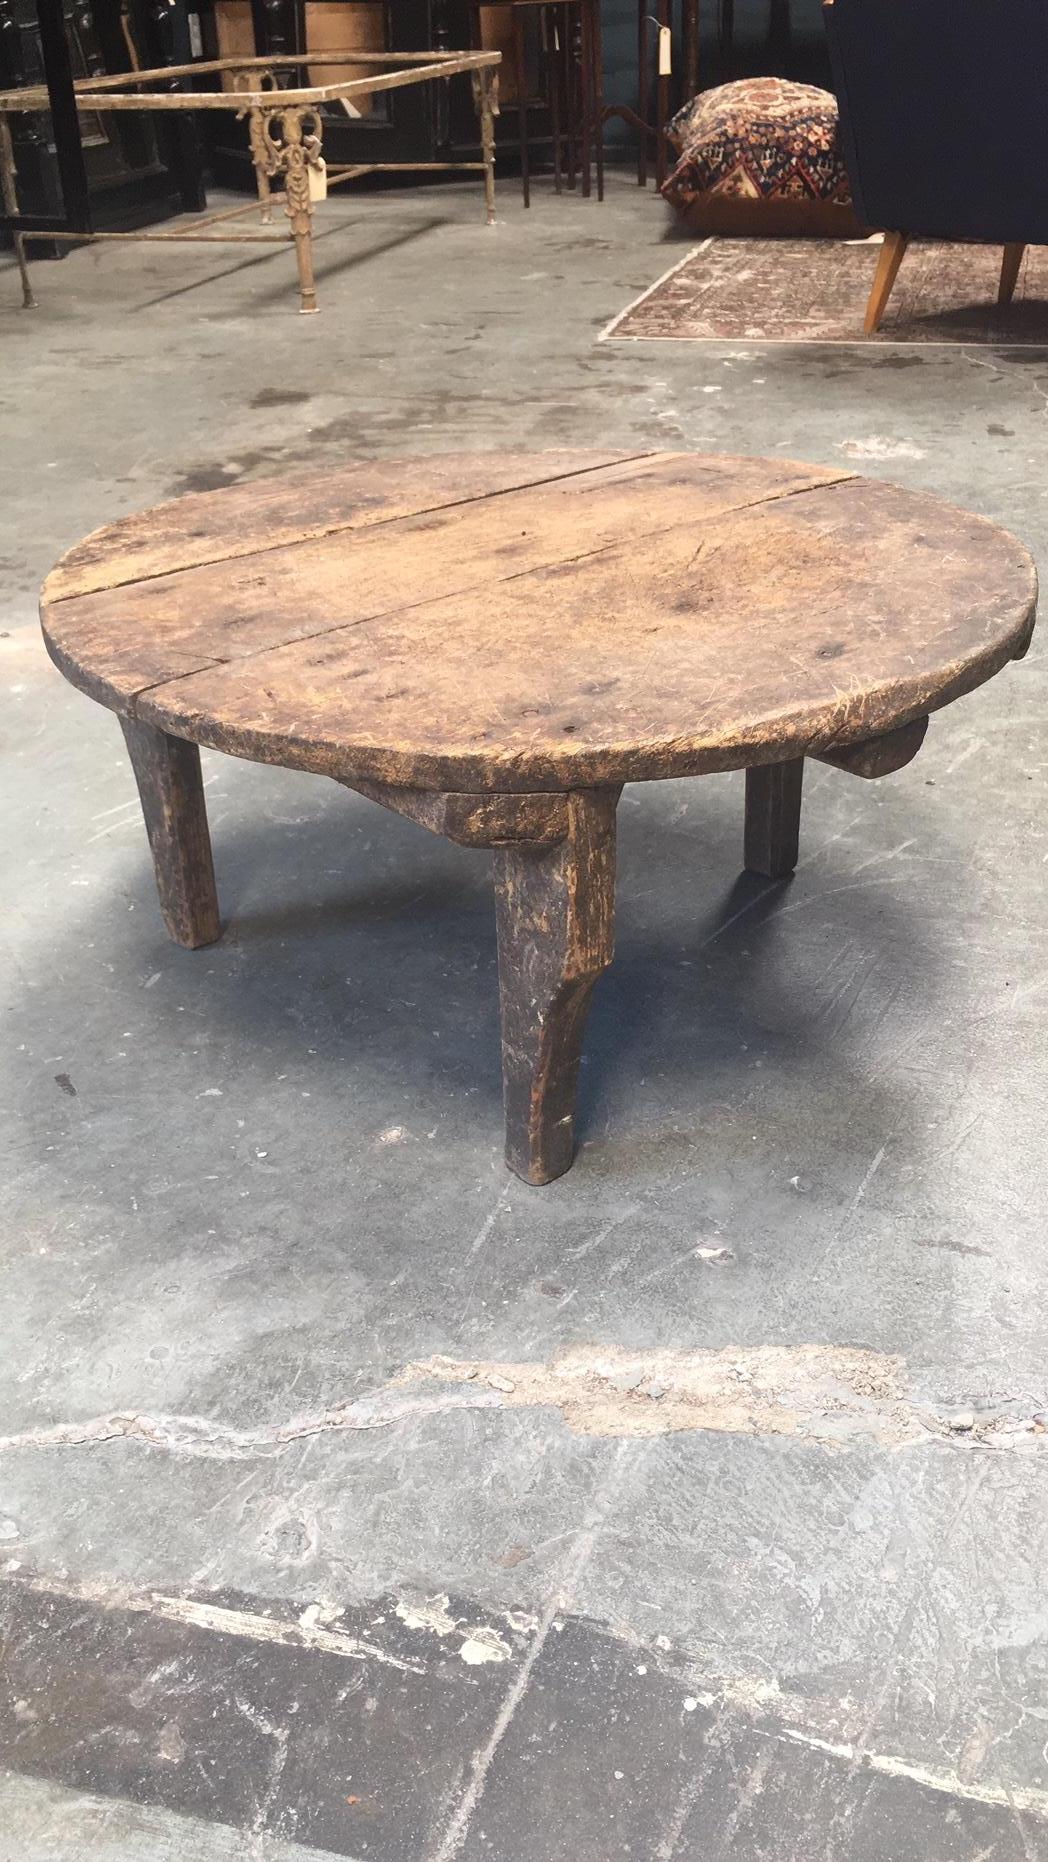 Great antique farm style side table from Europe. Signs of aging but still sturdy. Very low at 12.5